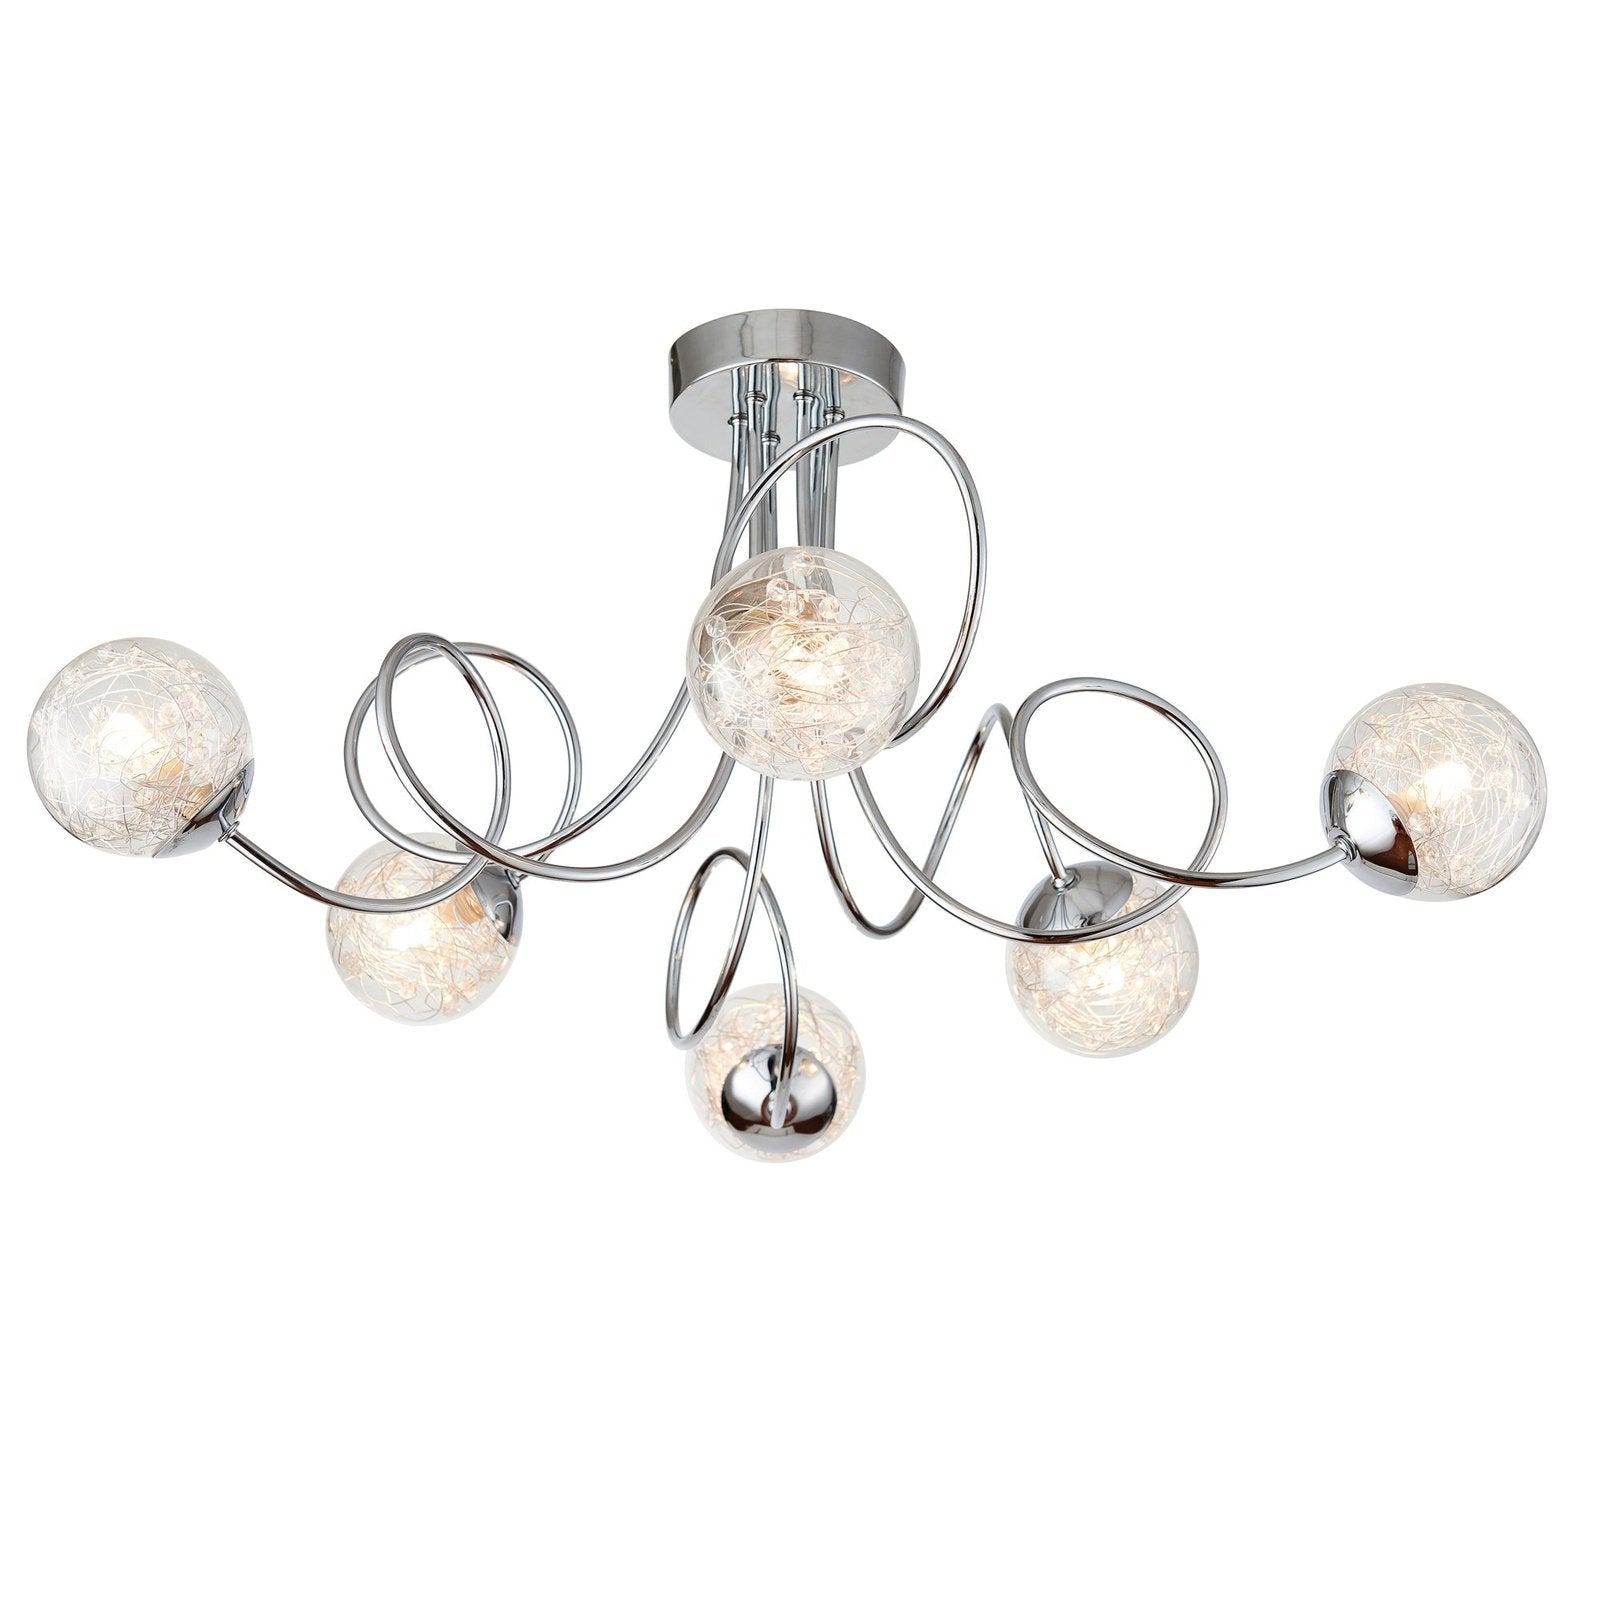 Lilia Modern Style Compact Ceiling Light - Loop Arms - Chrome